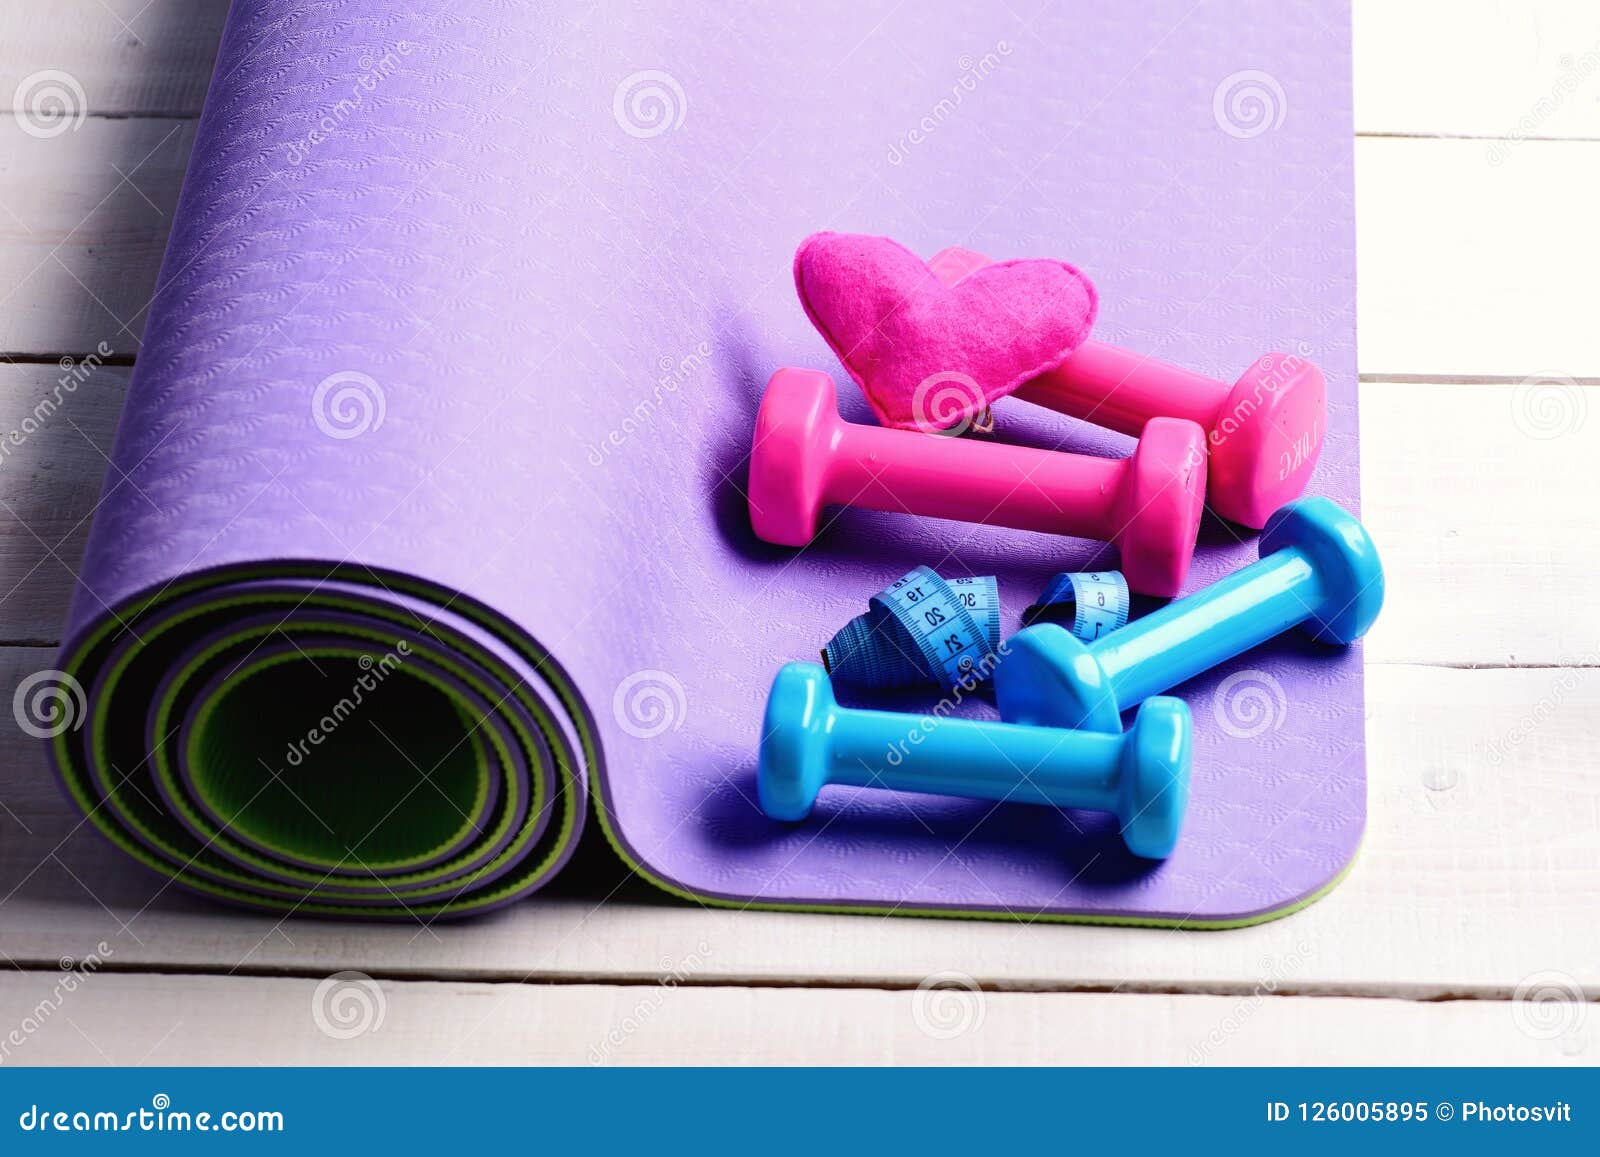 Barbells and Soft Pink Heart on Purple Yoga Mat Stock Image - Image of ...